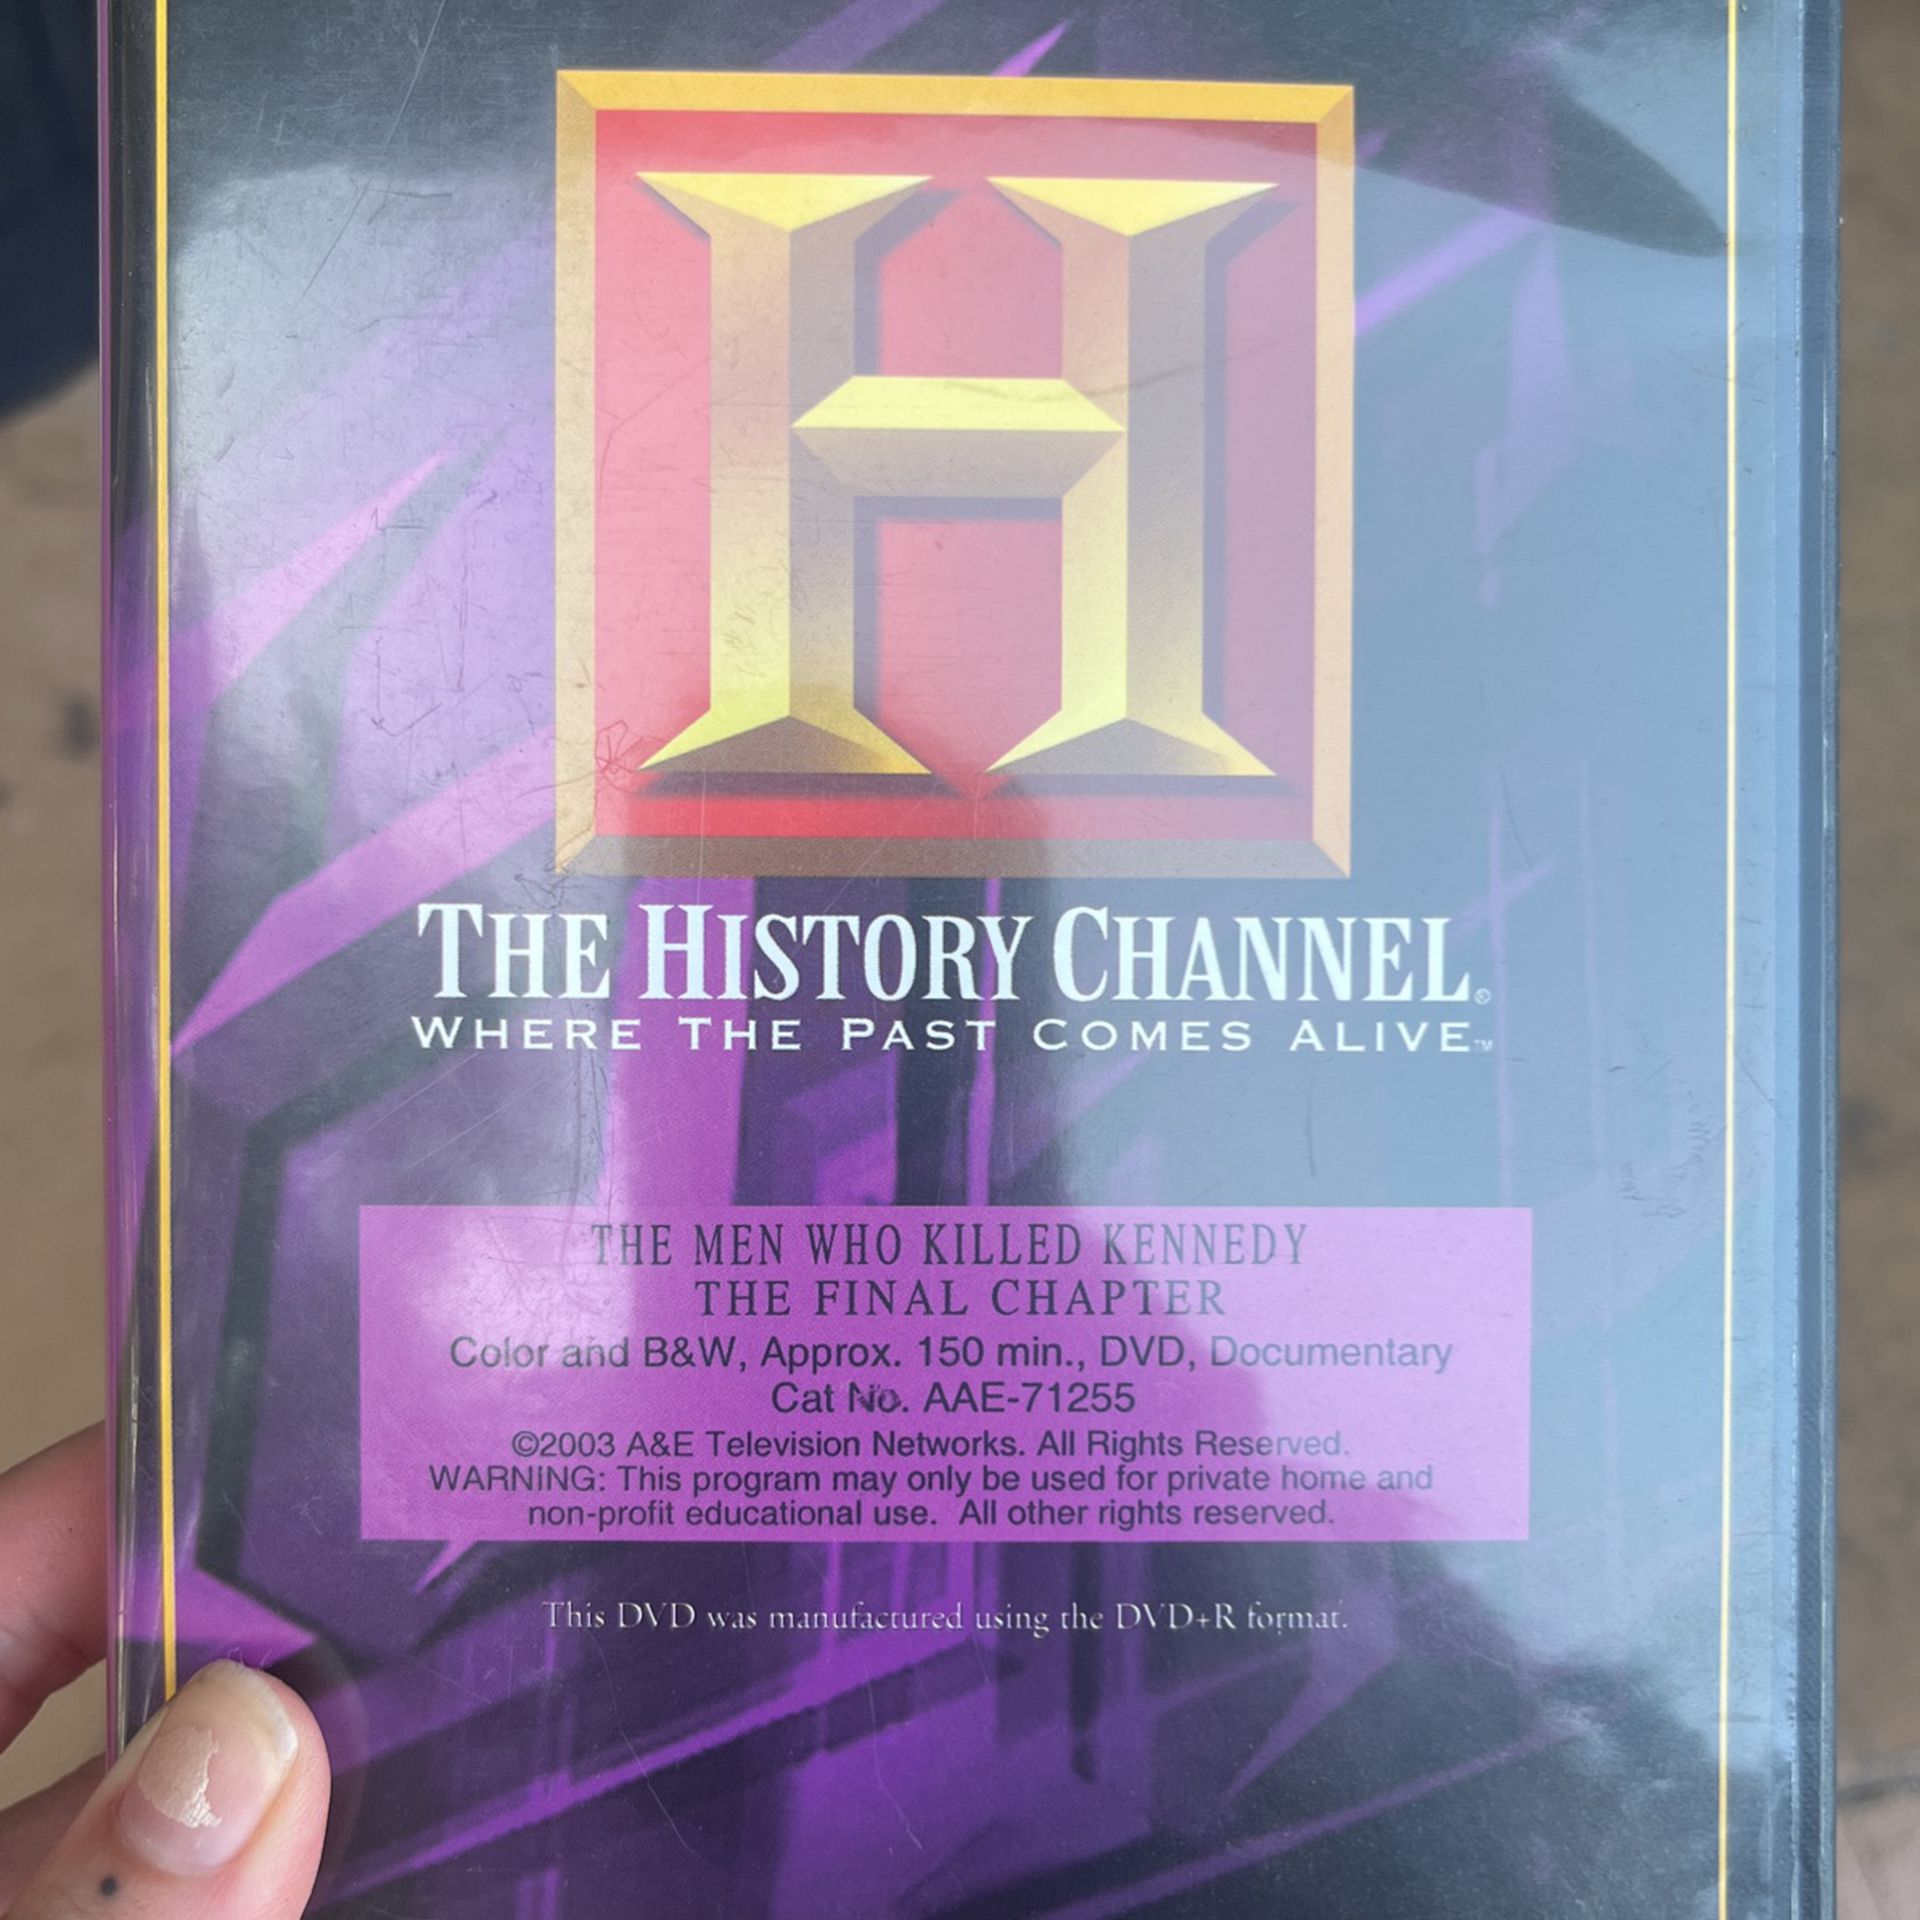 The History Channel DVD